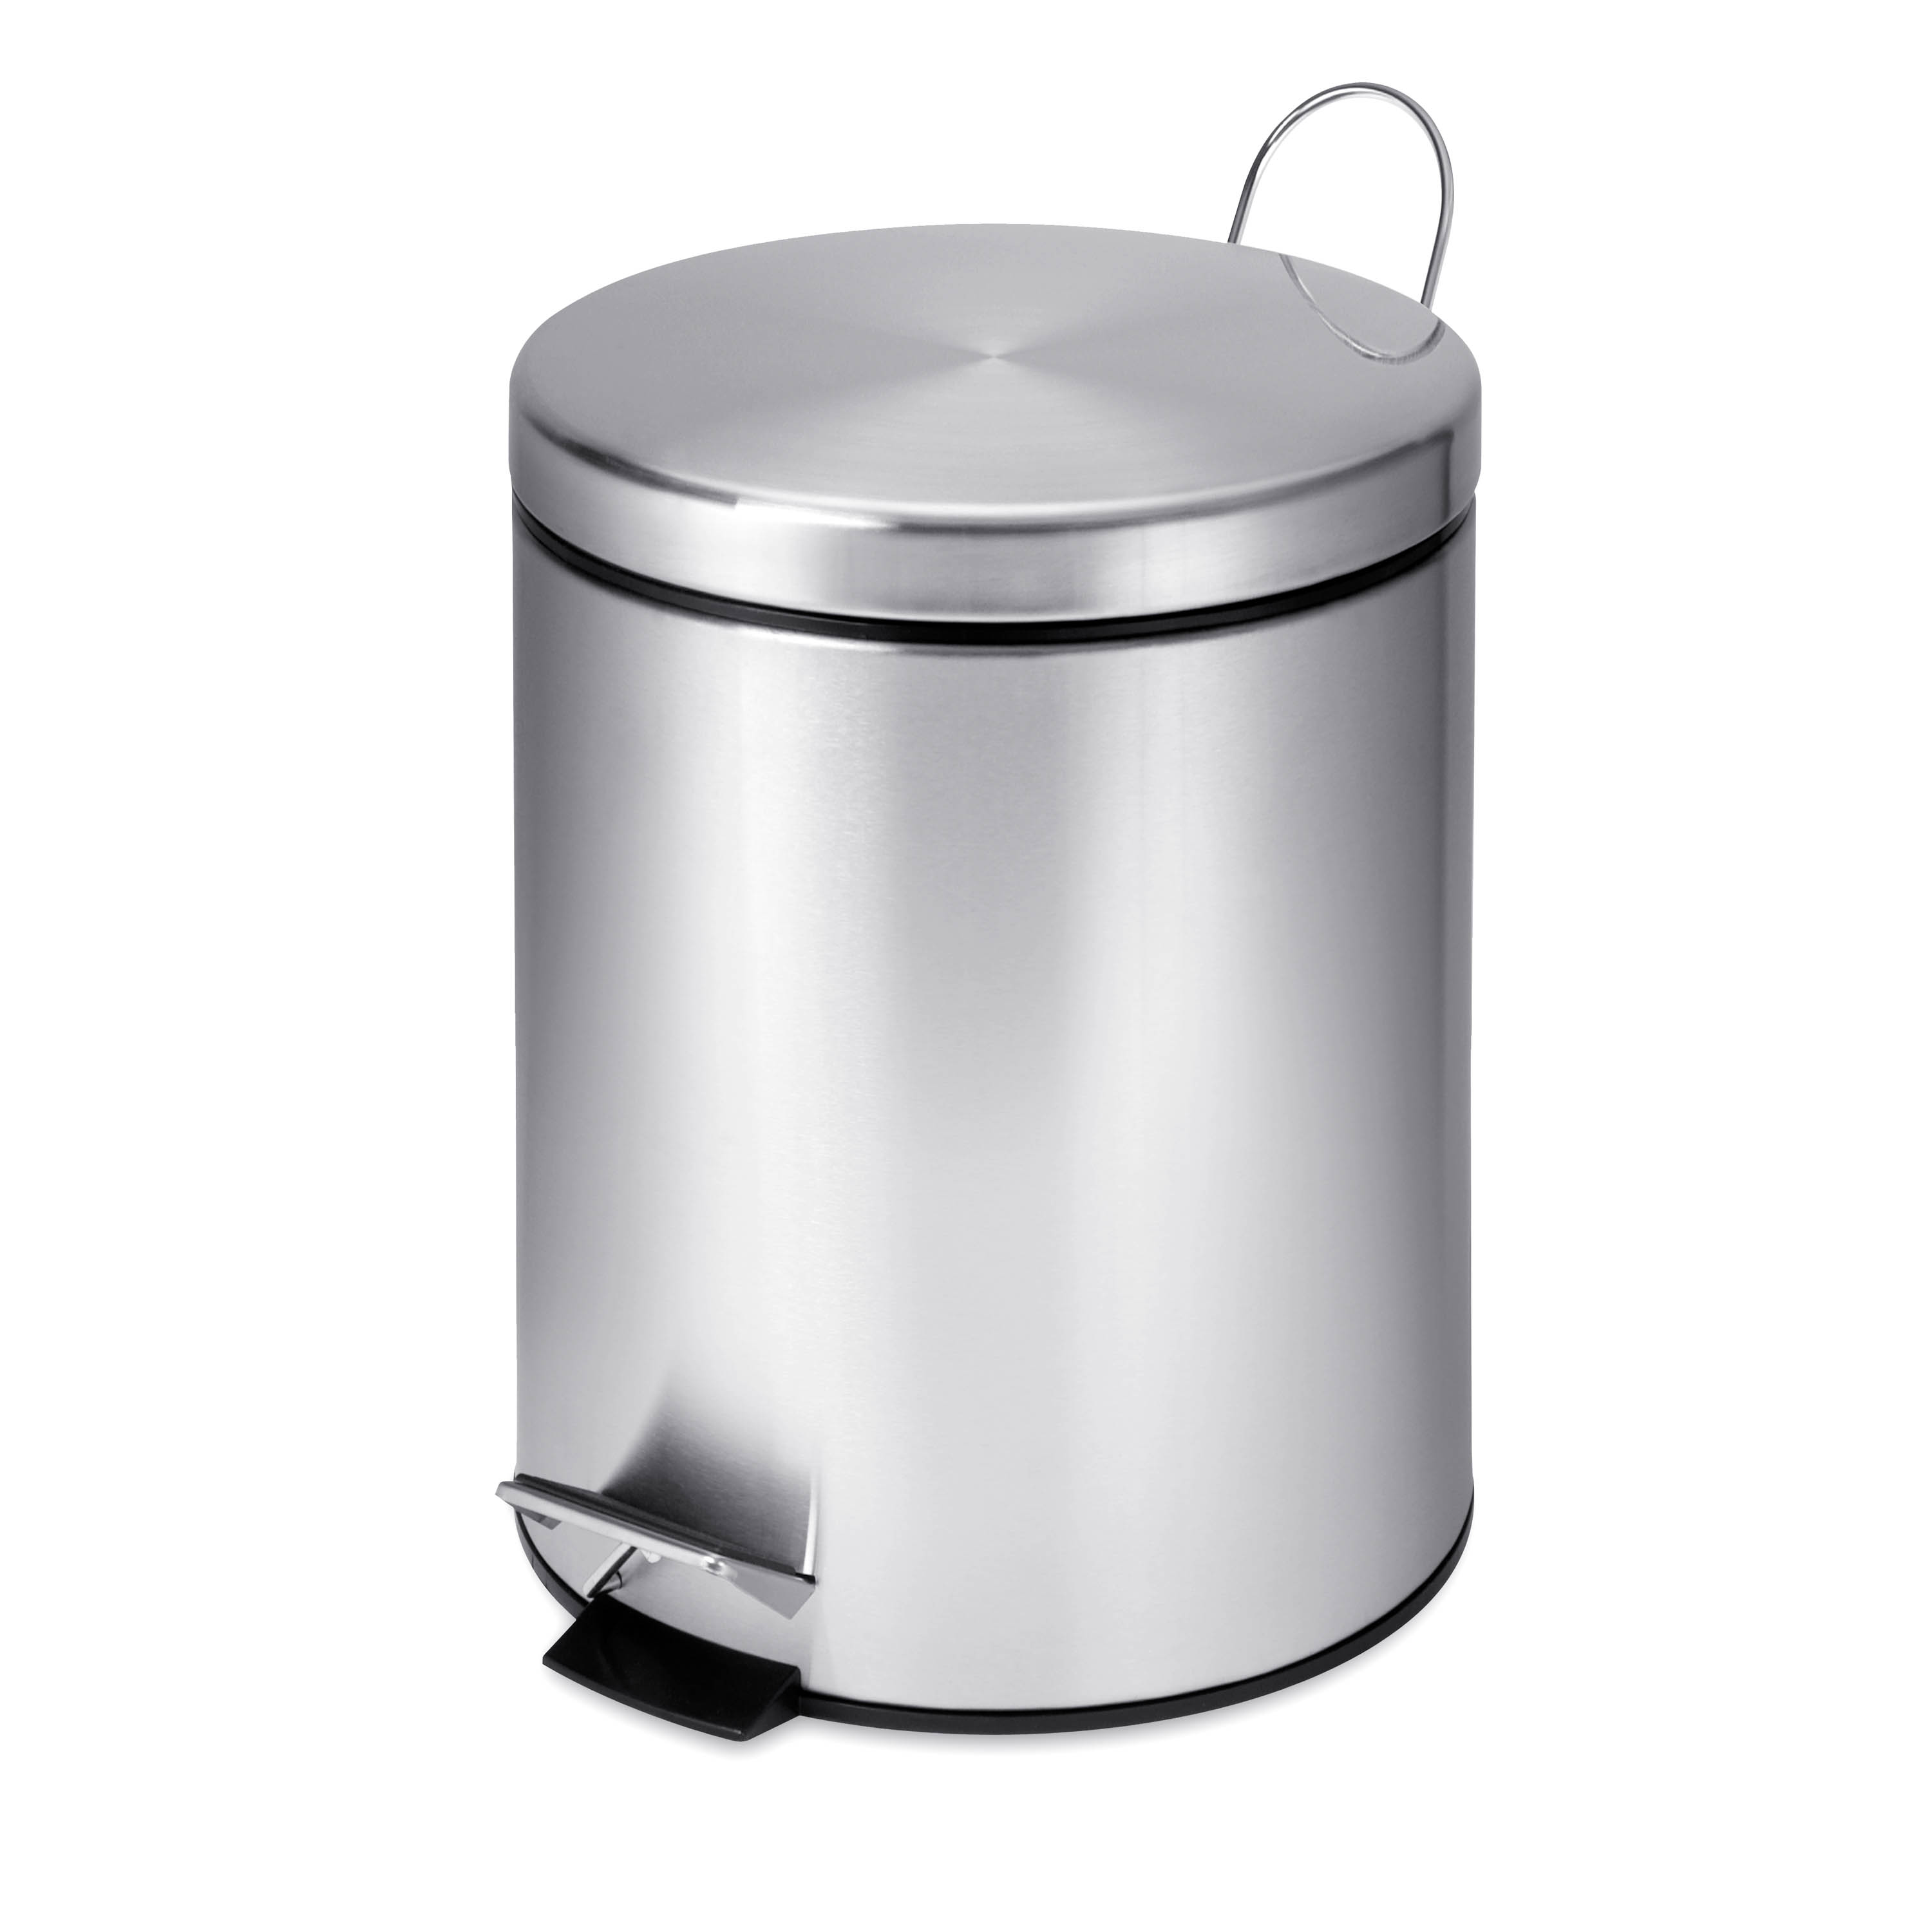 Honey-Can-Do Trs-01449 5 Liter Round Stainless Steel Step Trash Can - Stainless Steel - image 2 of 7